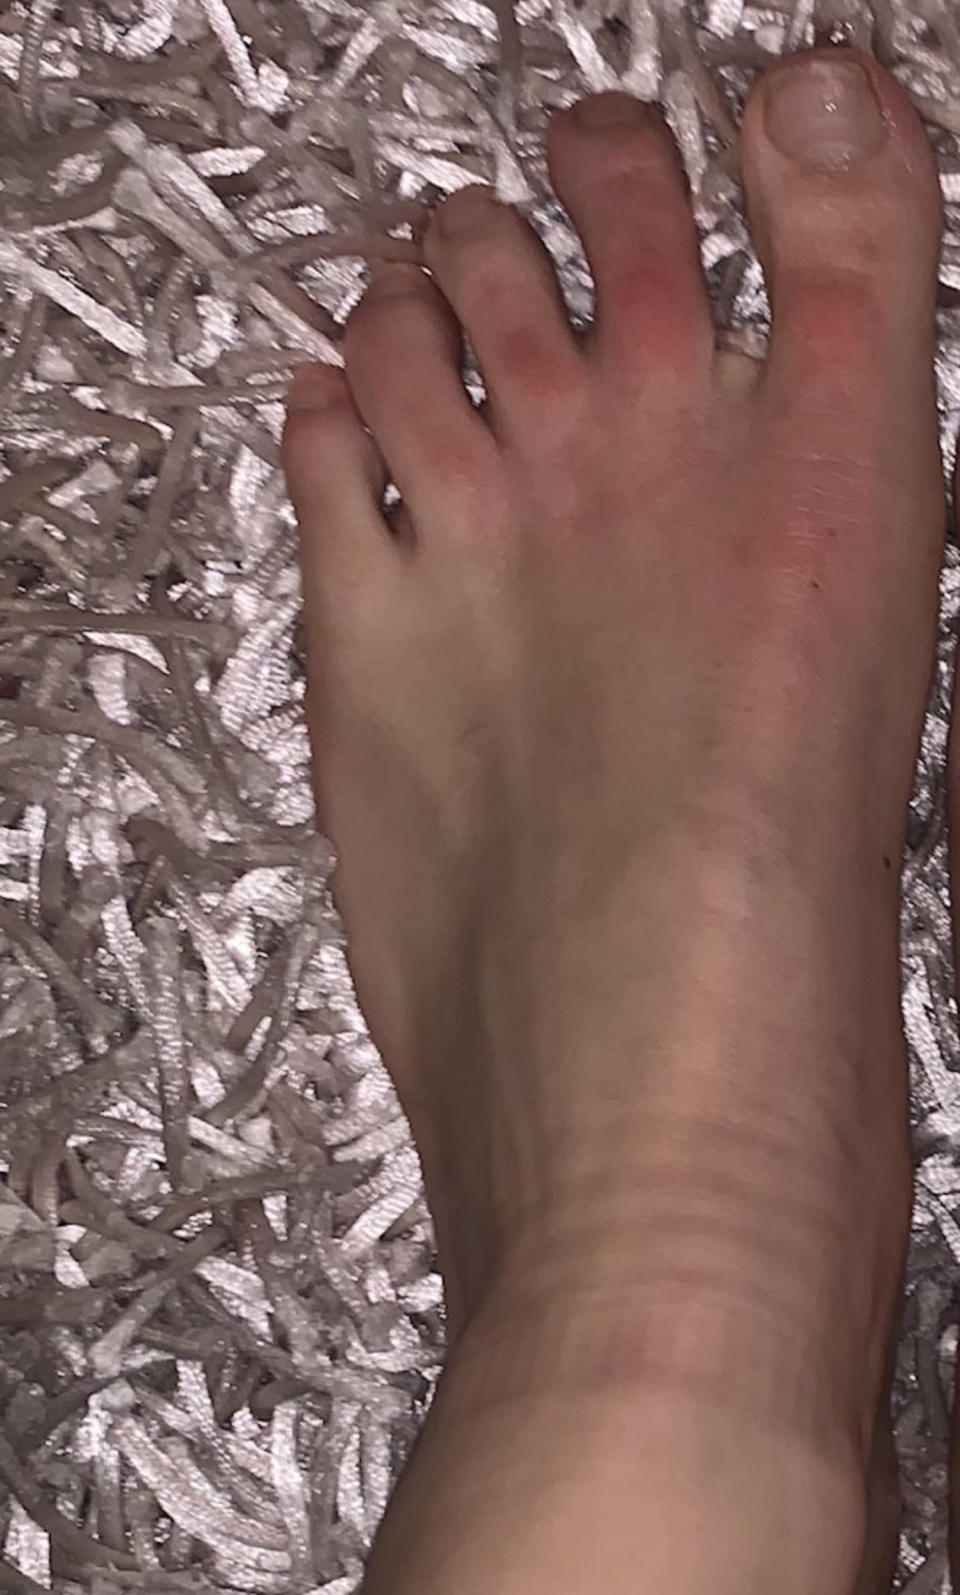 Rachel Sommer, who lives in Long Island, New York, shared a picture of her foot condition on Twitter. She did not get tested for coronavirus, but her symptoms included a slightly raised temperature, decreased appetite, fatigue, difficulty breathing and a sore throat. (Rachel Sommer)